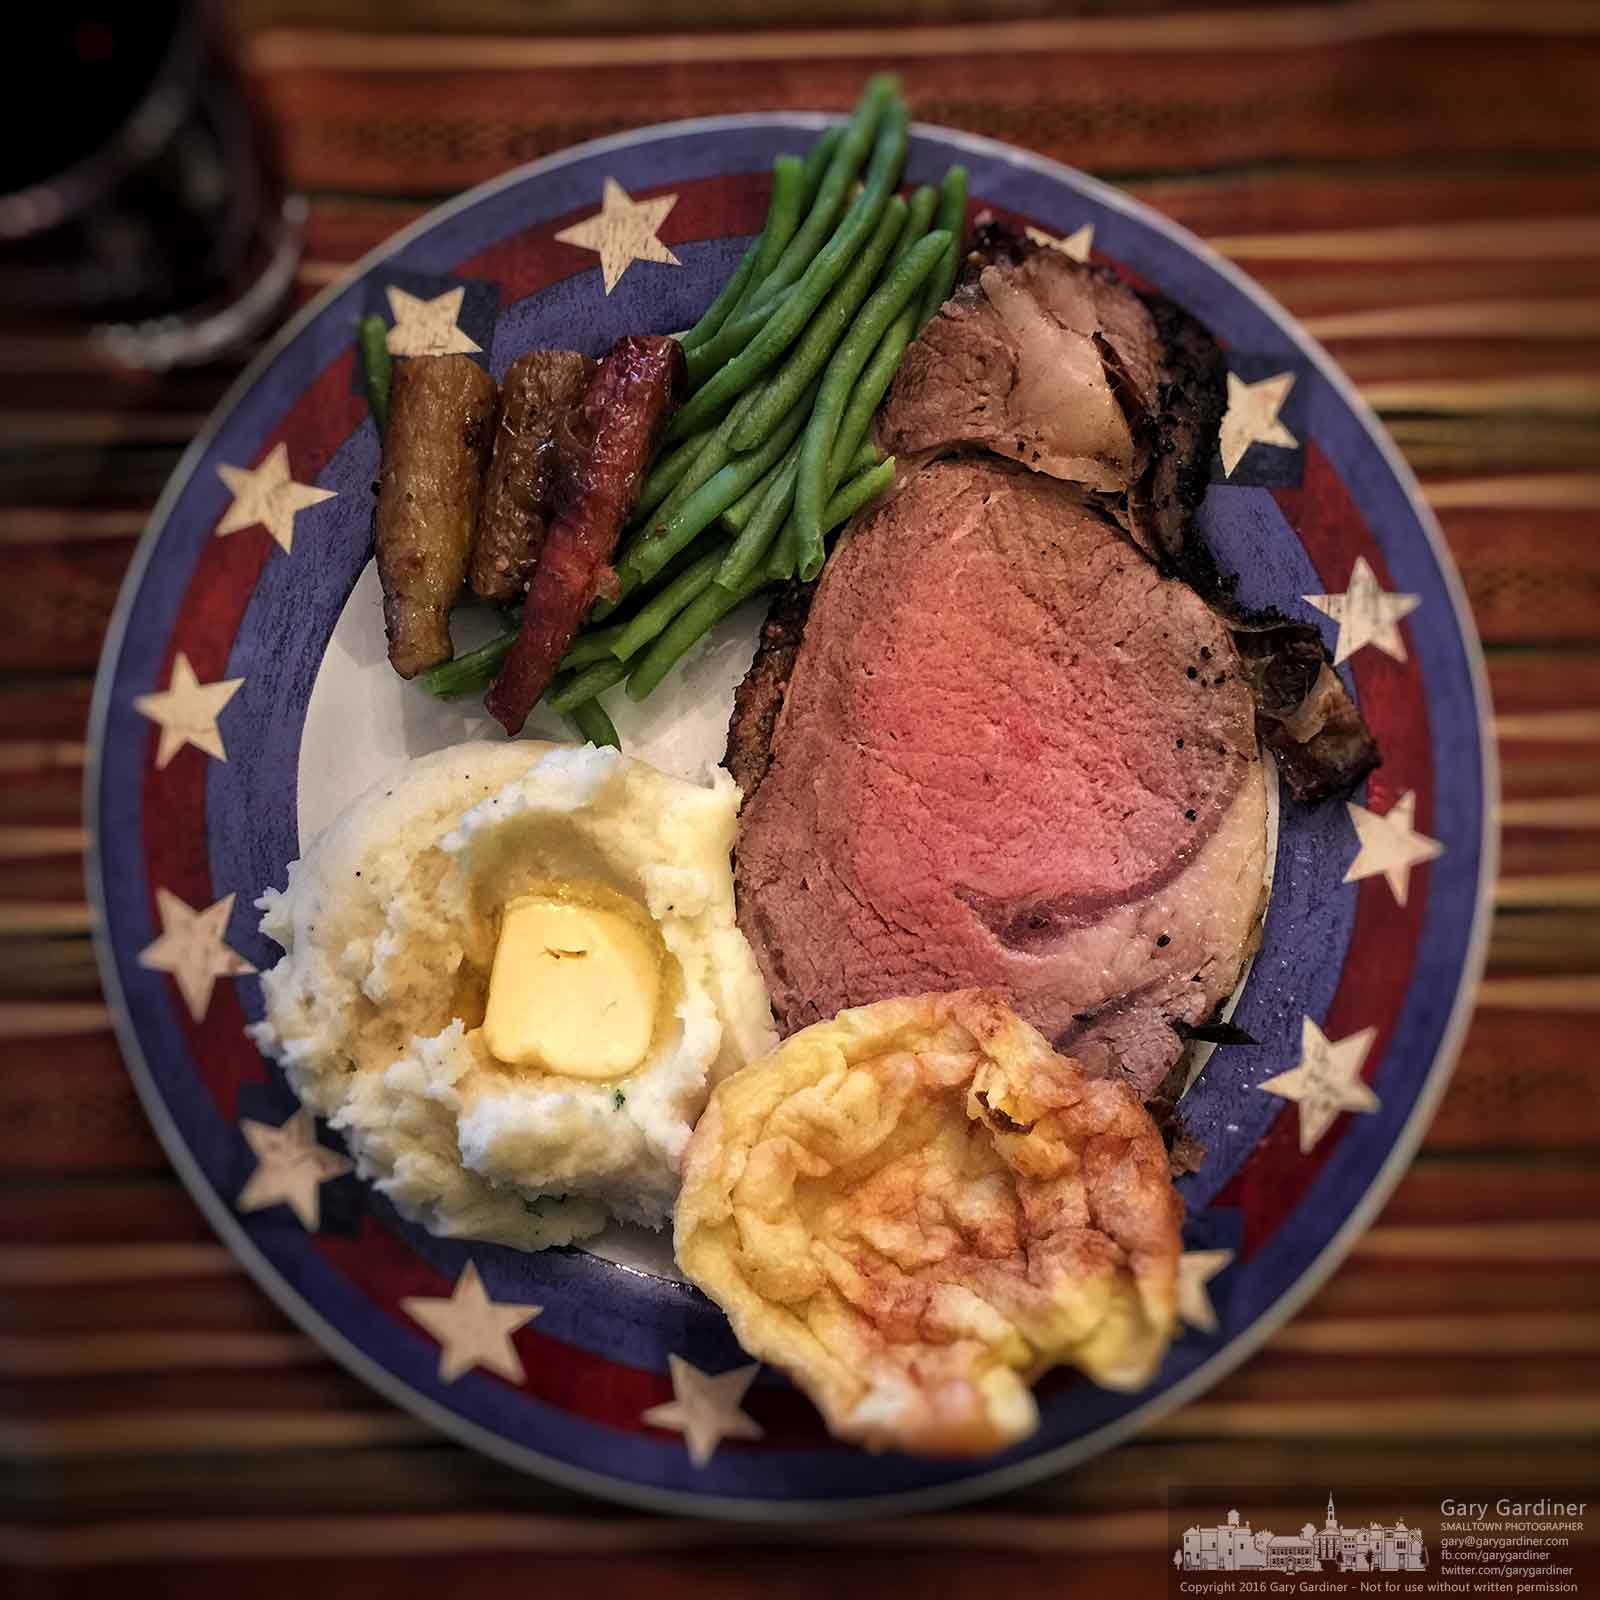 A Christmas dinner plate displaying prime rib, garlic mashed potatoes, green beans, roasted carrots, and Yorkshire pudding sits on the table ready for dining. My Final Photo for Dec. 25, 2016.